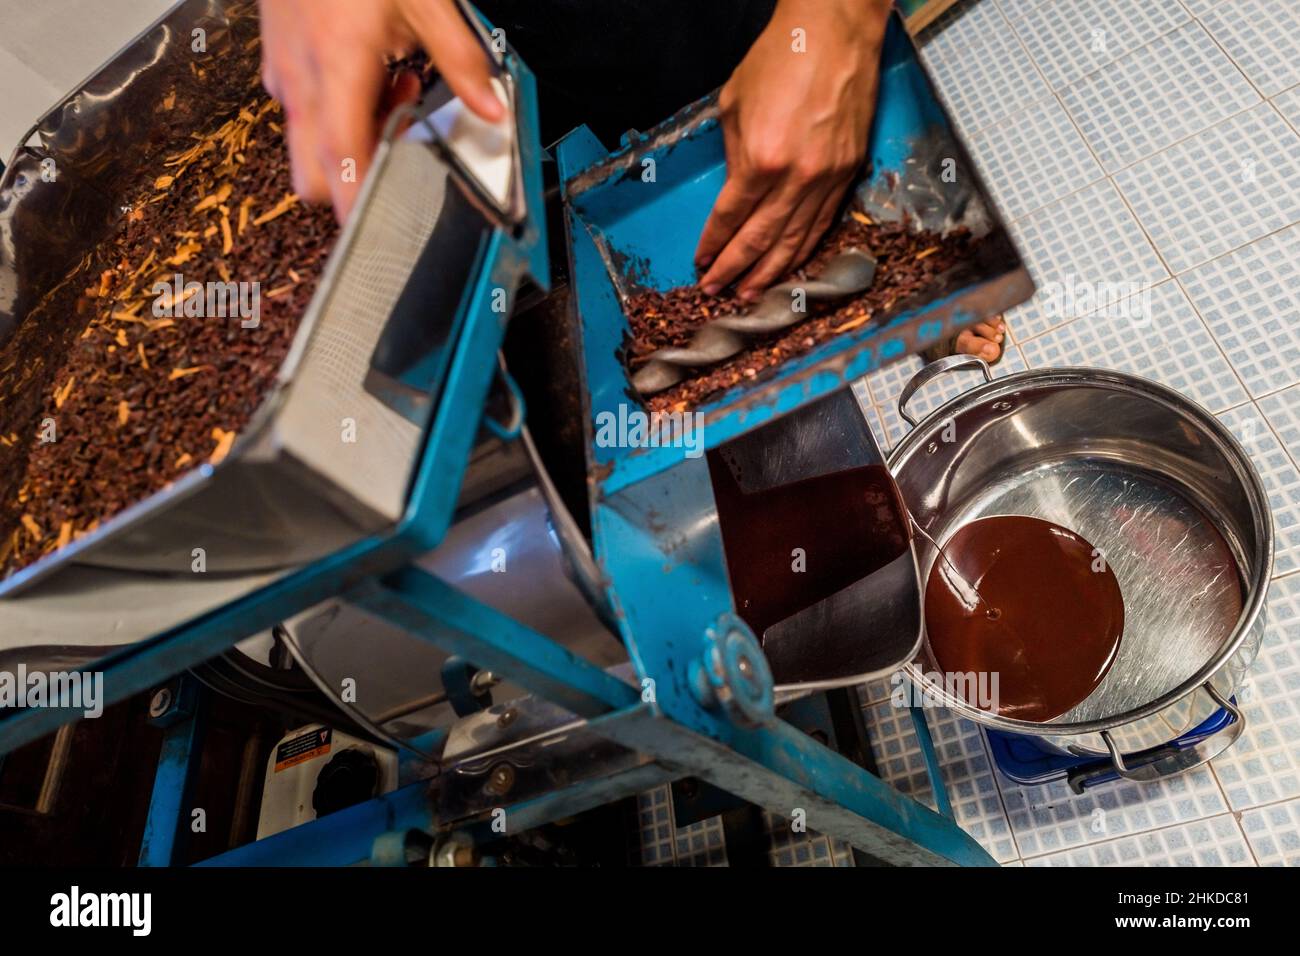 A fresh cacao liquor flows out of a grinder machine in artisanal chocolate manufacture in Xochistlahuaca, Guerrero, Mexico. Stock Photo